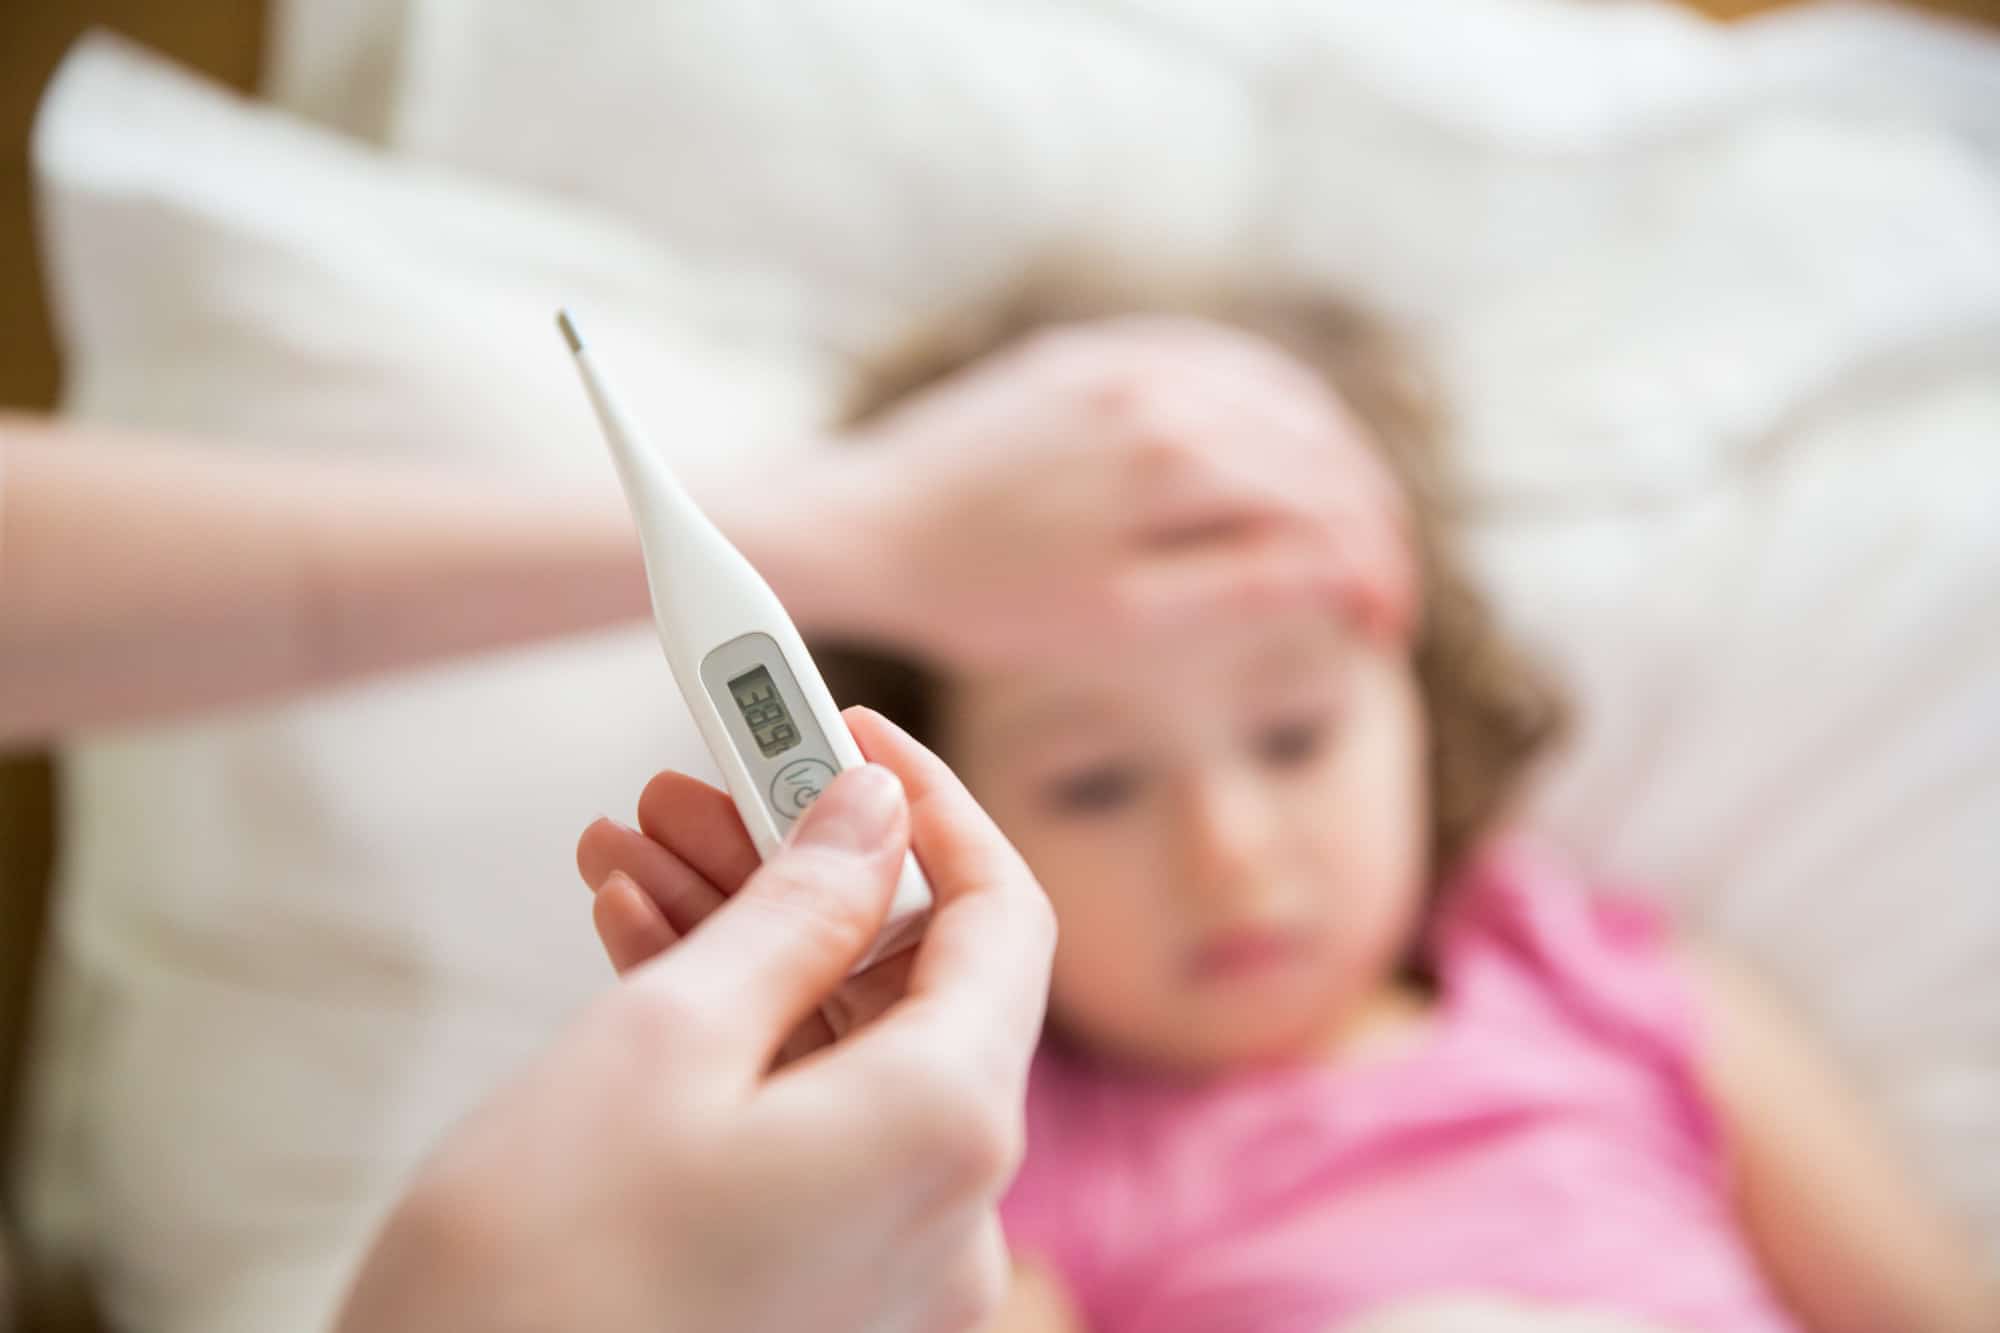 unsafe fever temperature for kids